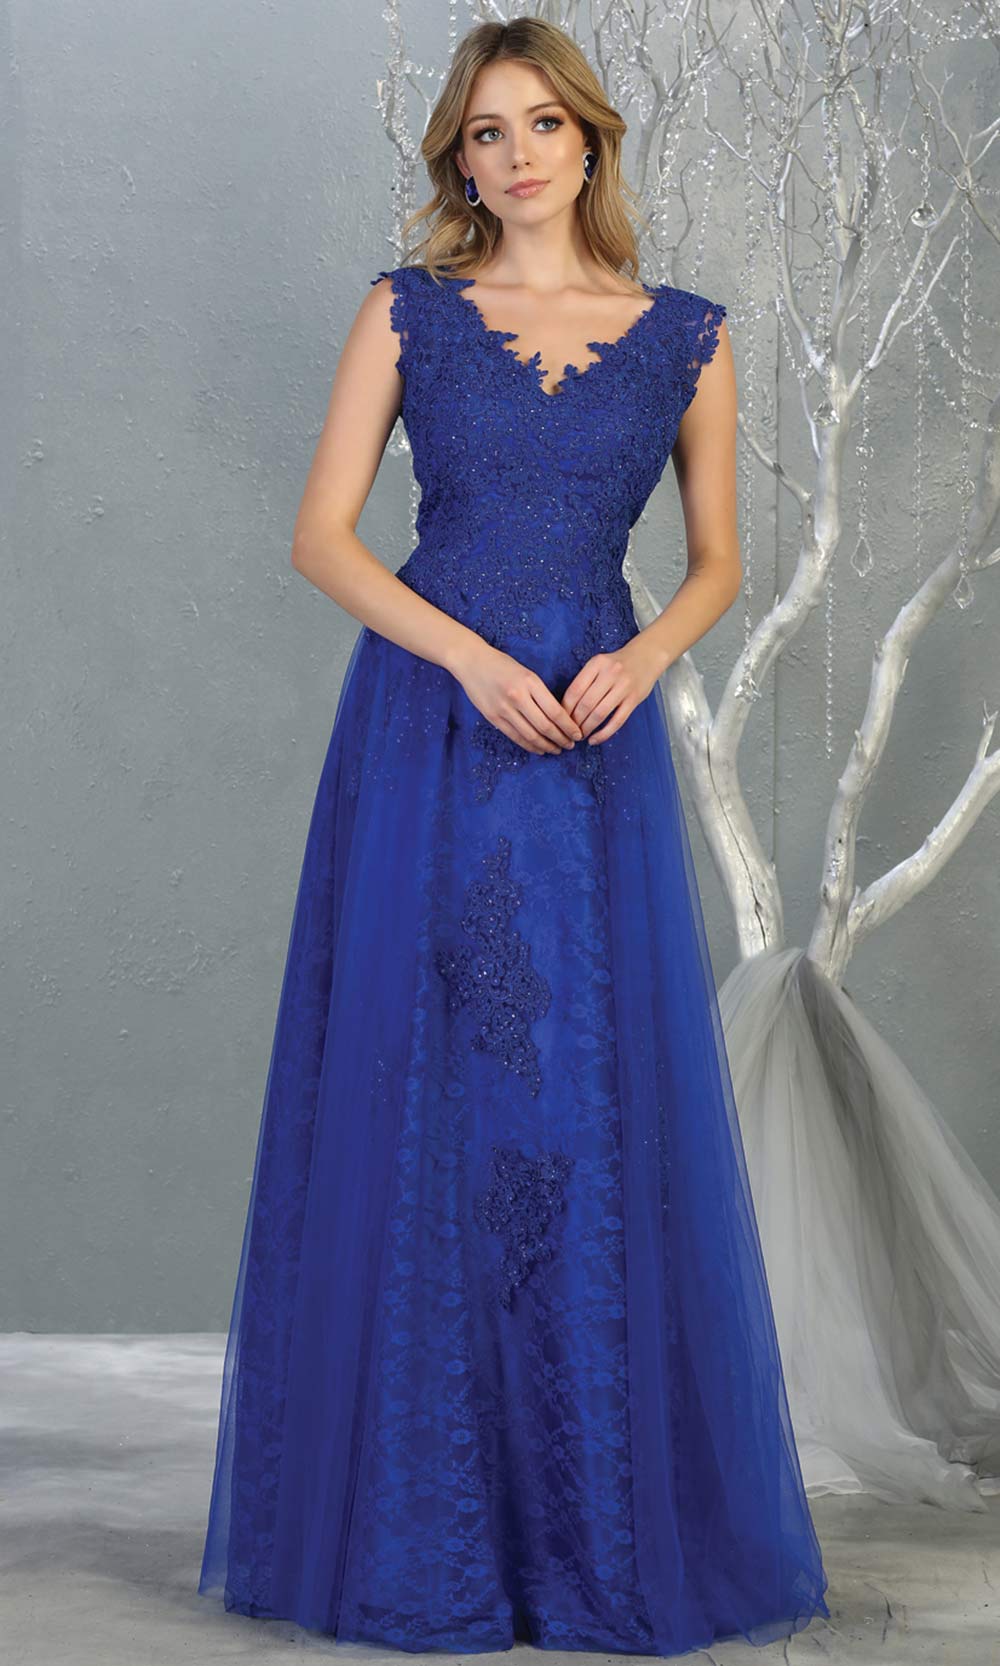 Mayqueen MQ1799 long royal blue v neck evening fitted dress. Full length royal blue lace gown w/skirt overlay is perfect for  enagagement/e-shoot dress, formal wedding guest, indowestern gown, evening party dress, prom, bridesmaid. Plus sizes avail-2.jpg